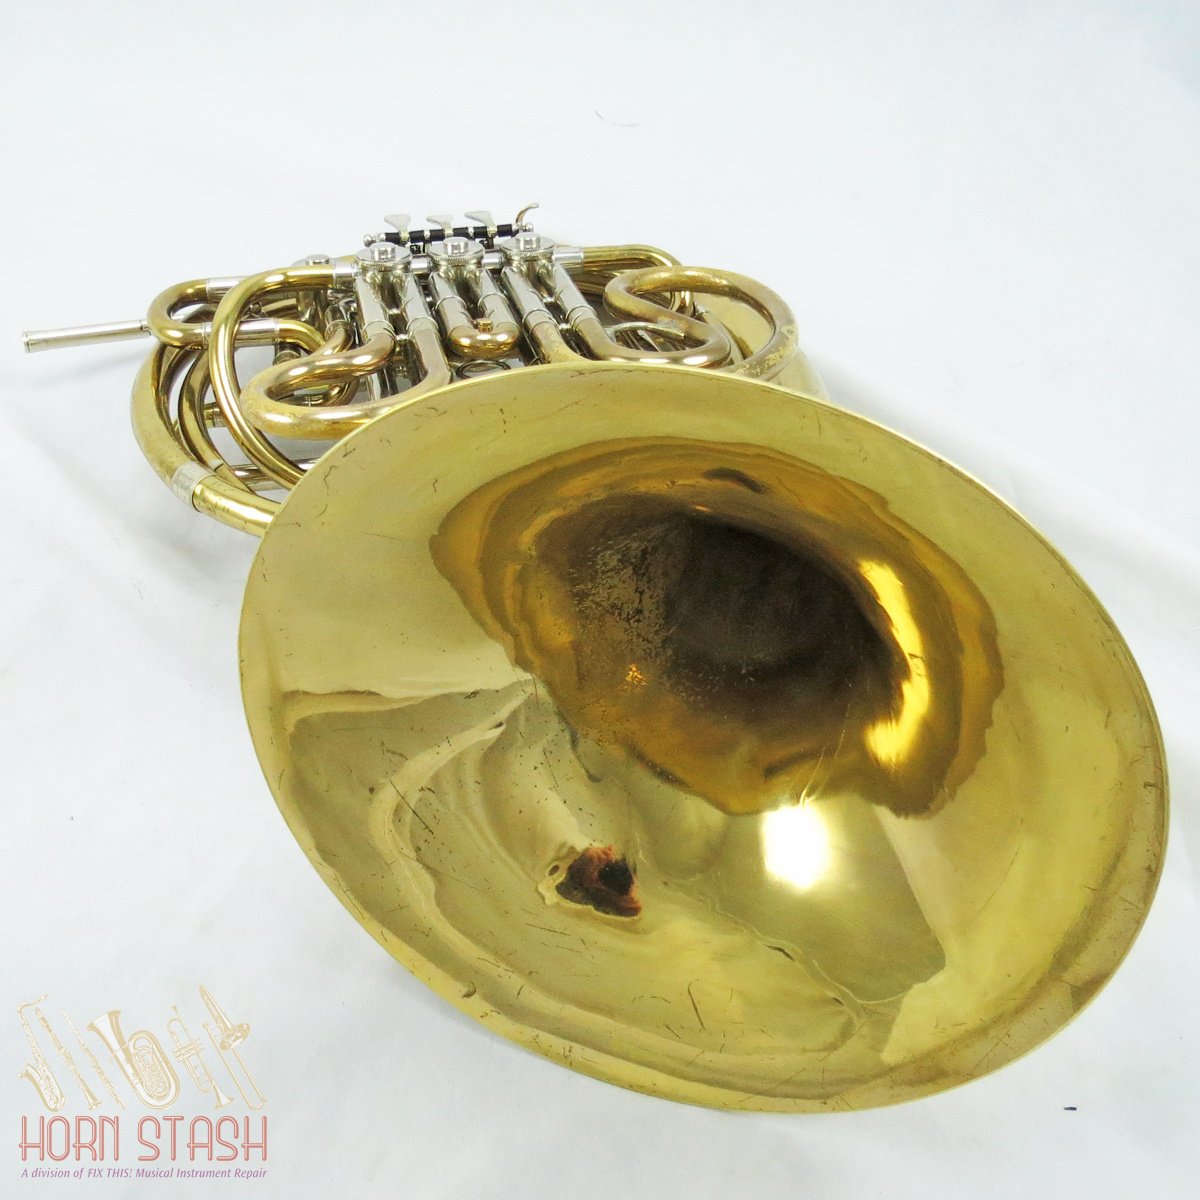 Holton Used Holton H378 Double French Horn- 6429XX